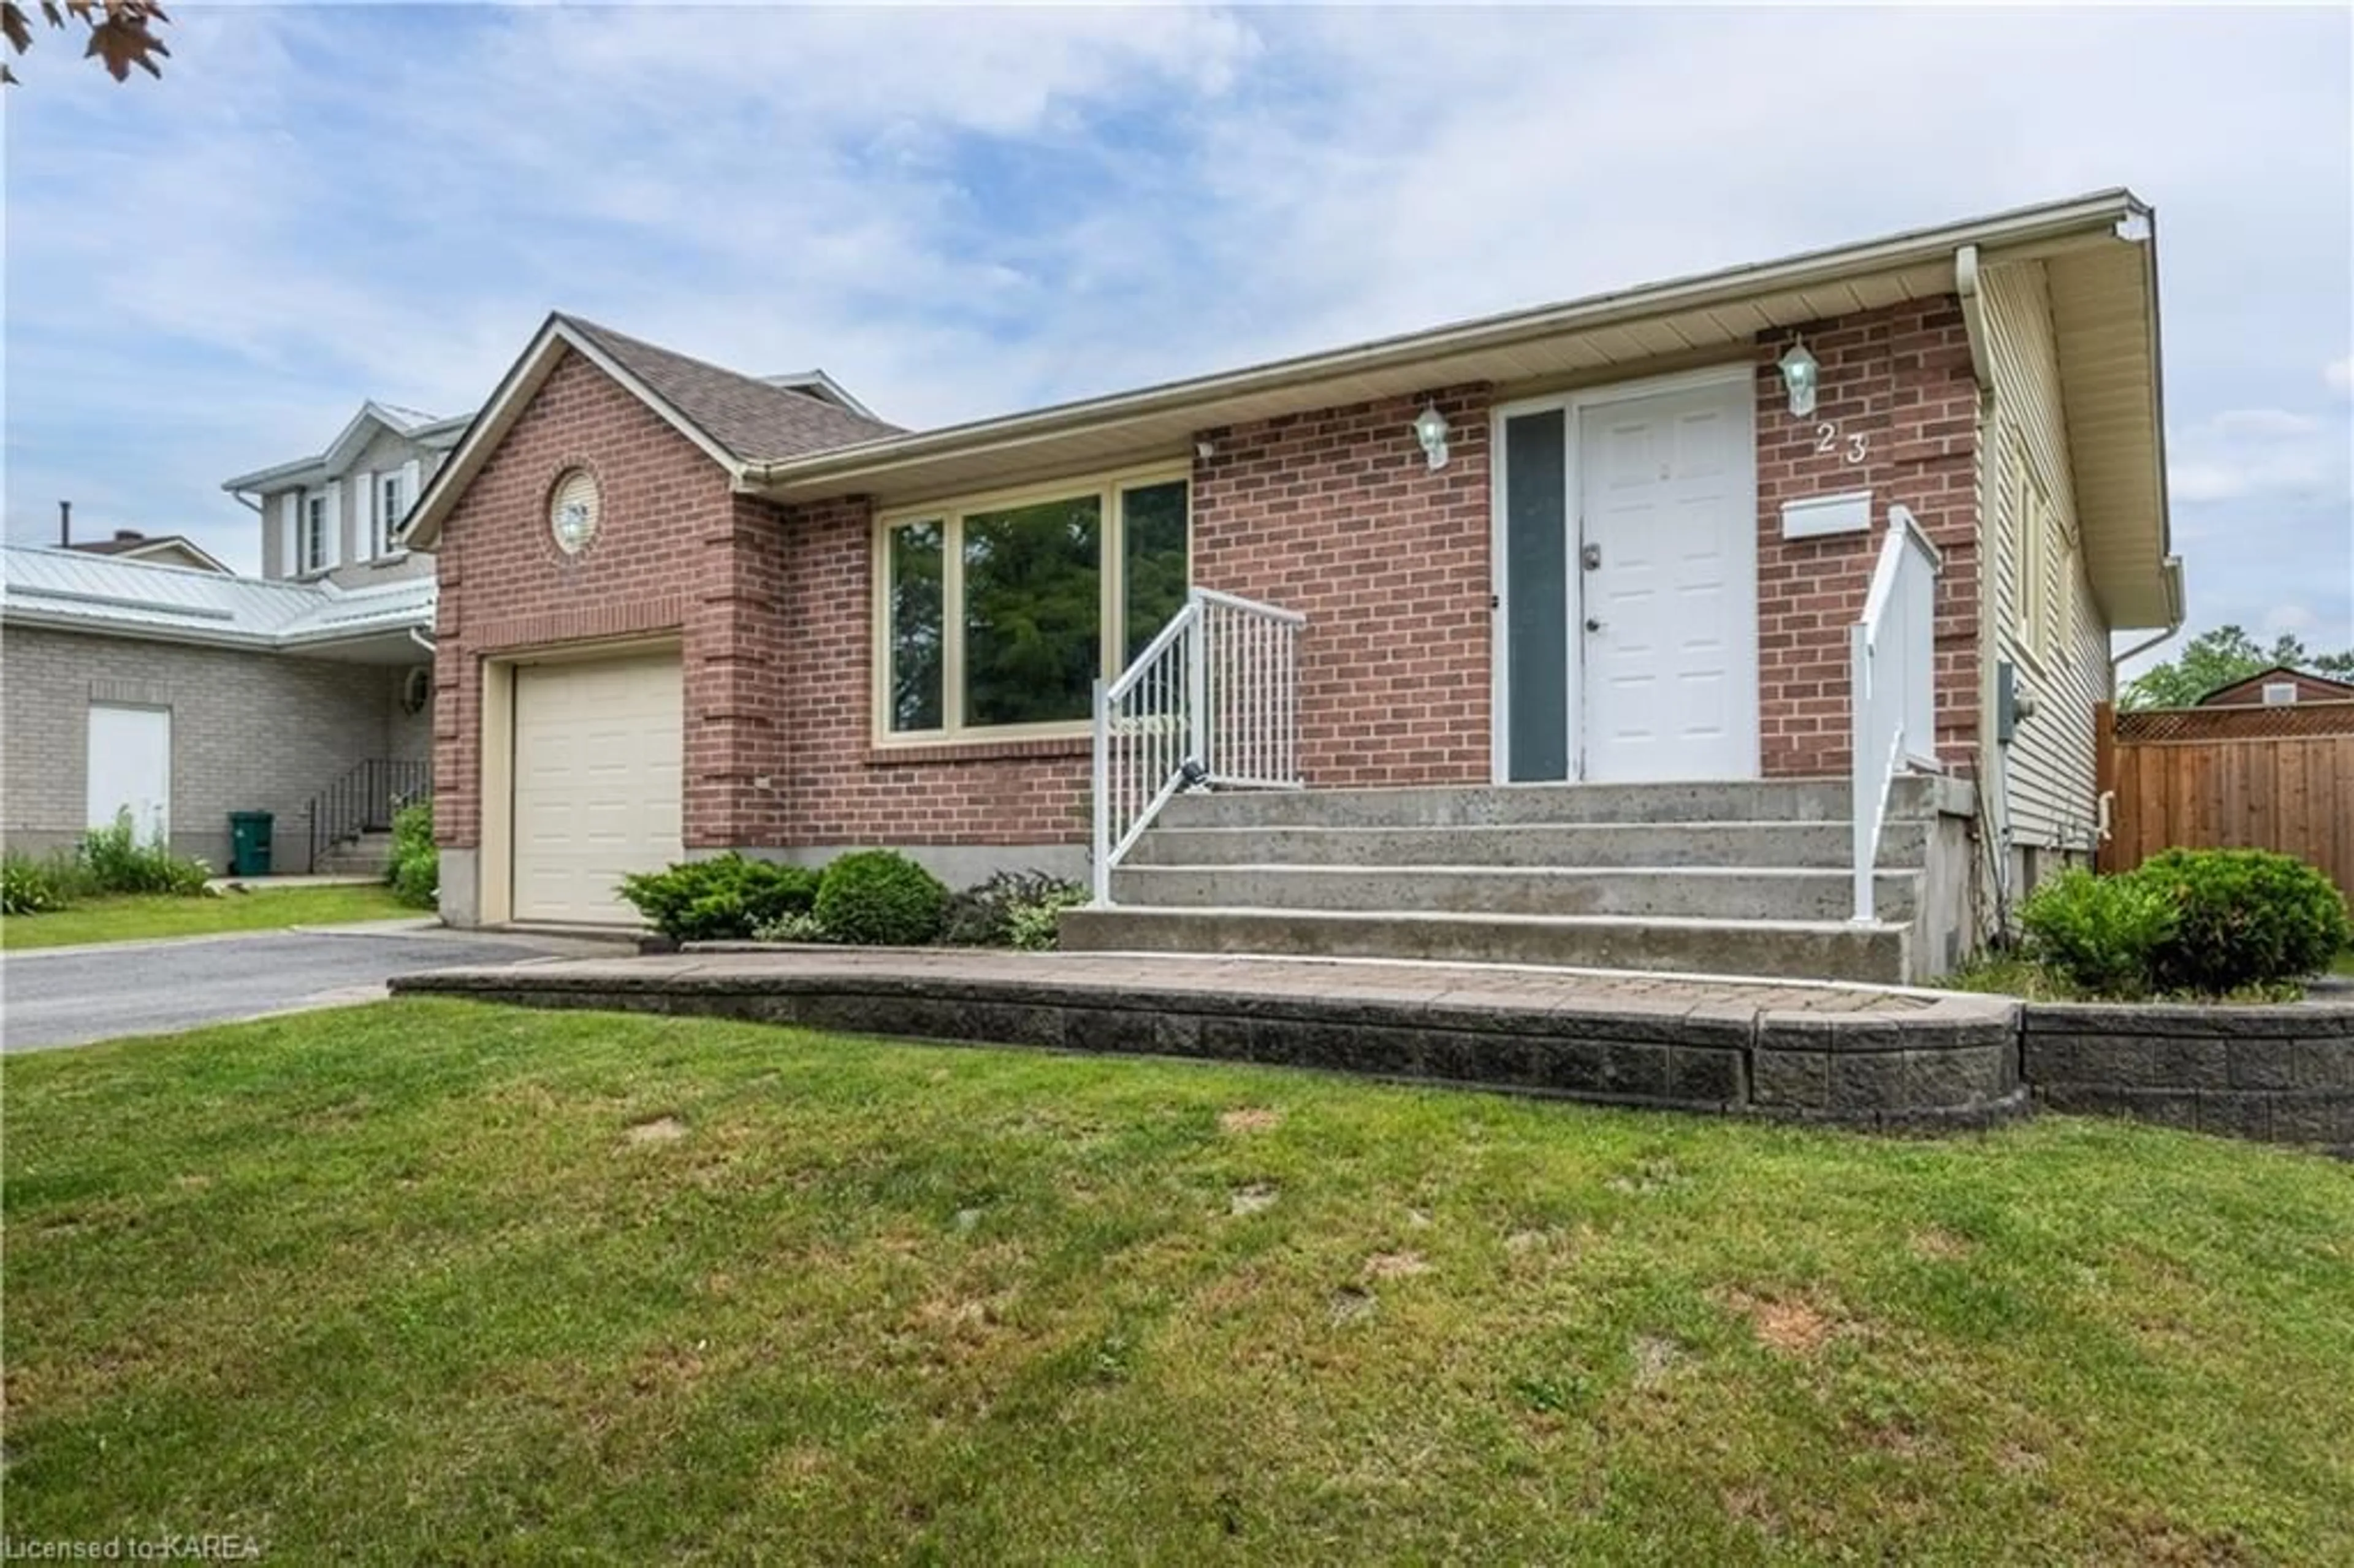 Home with brick exterior material for 23 Douglas Ave, Kingston Ontario K7K 6B5